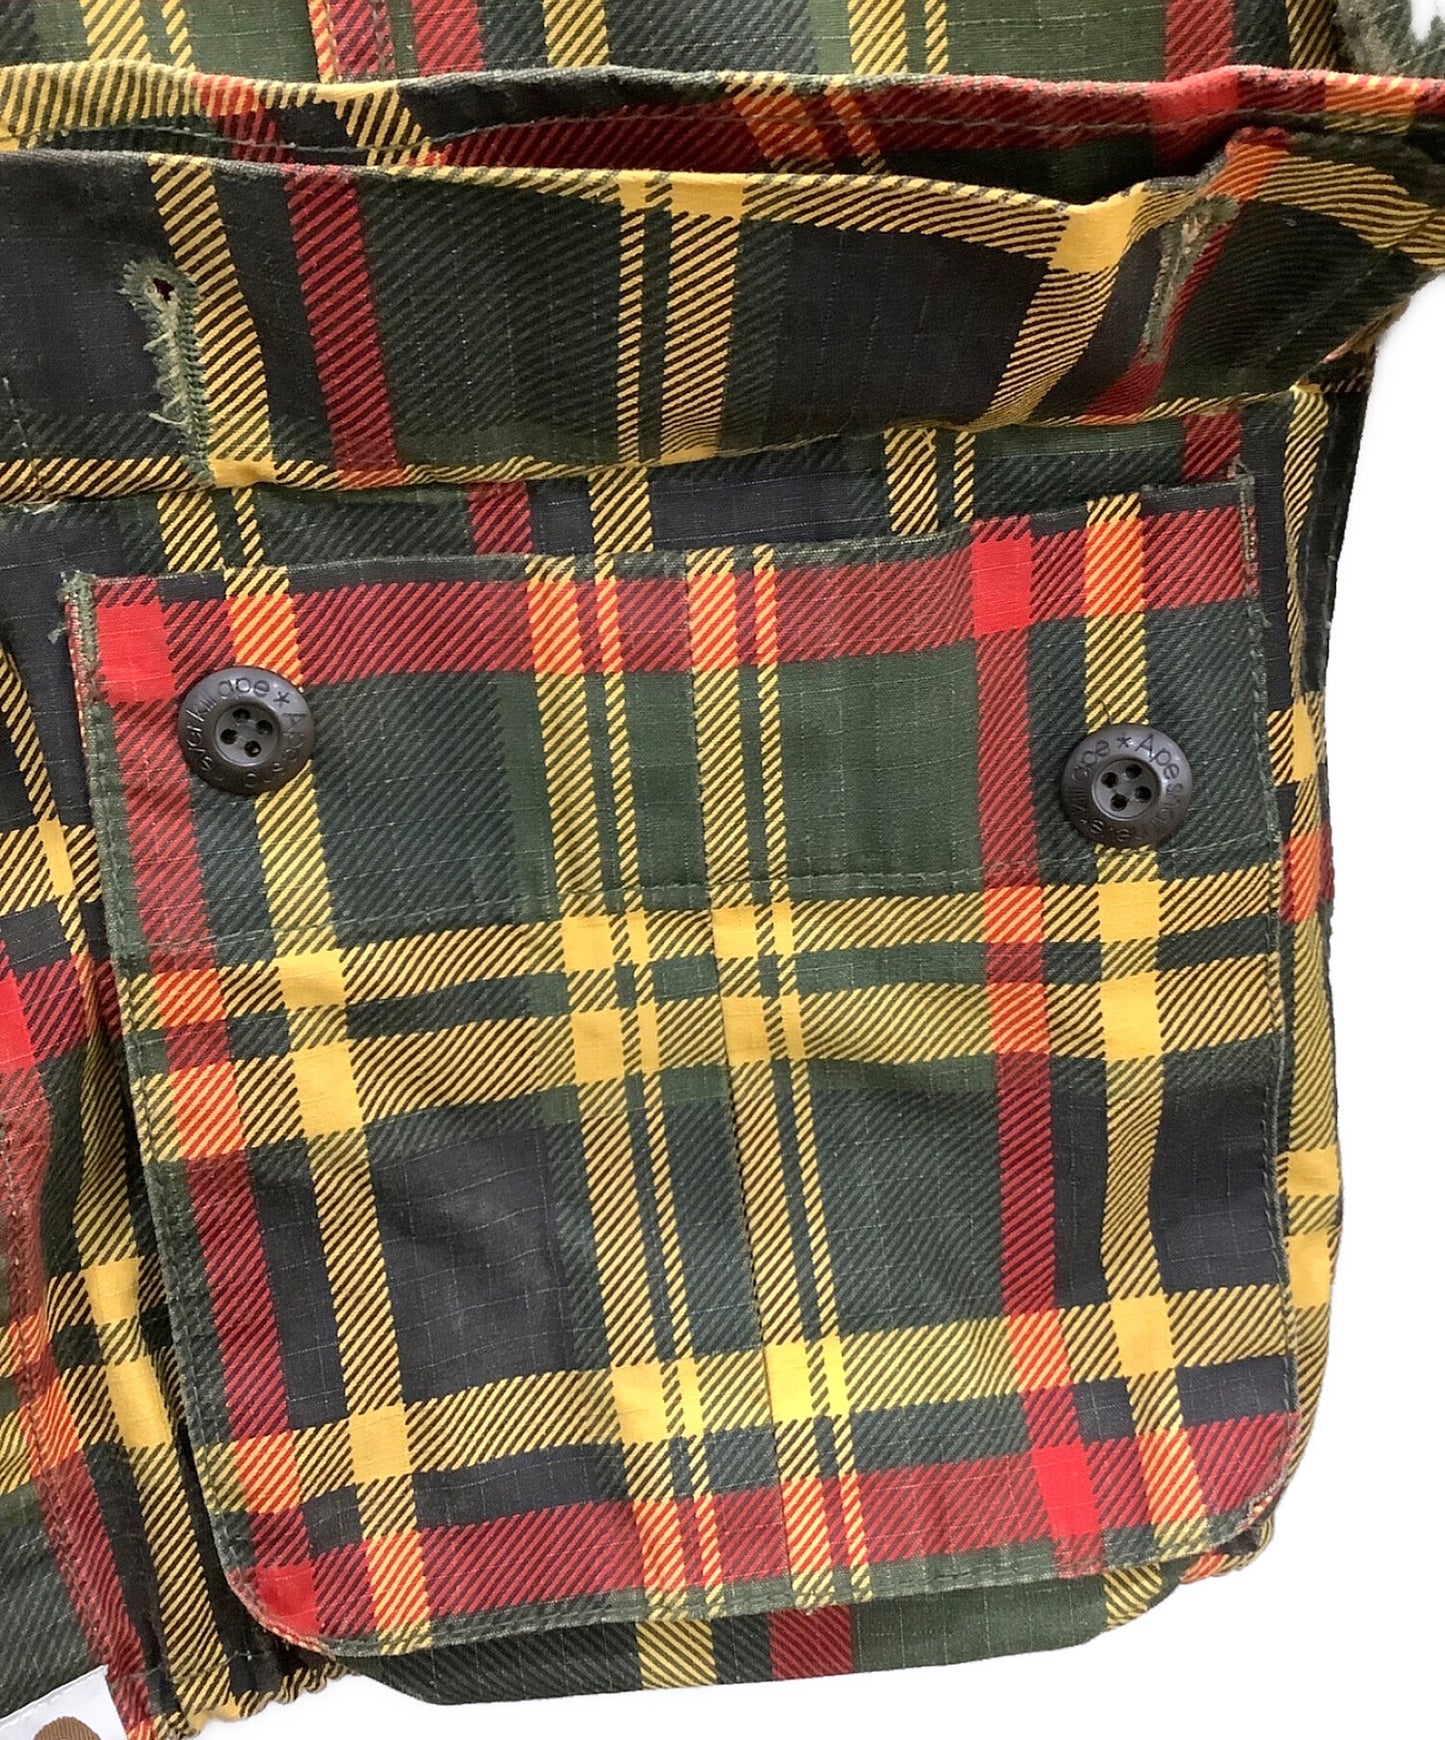 [Pre-owned] A BATHING APE military jacket